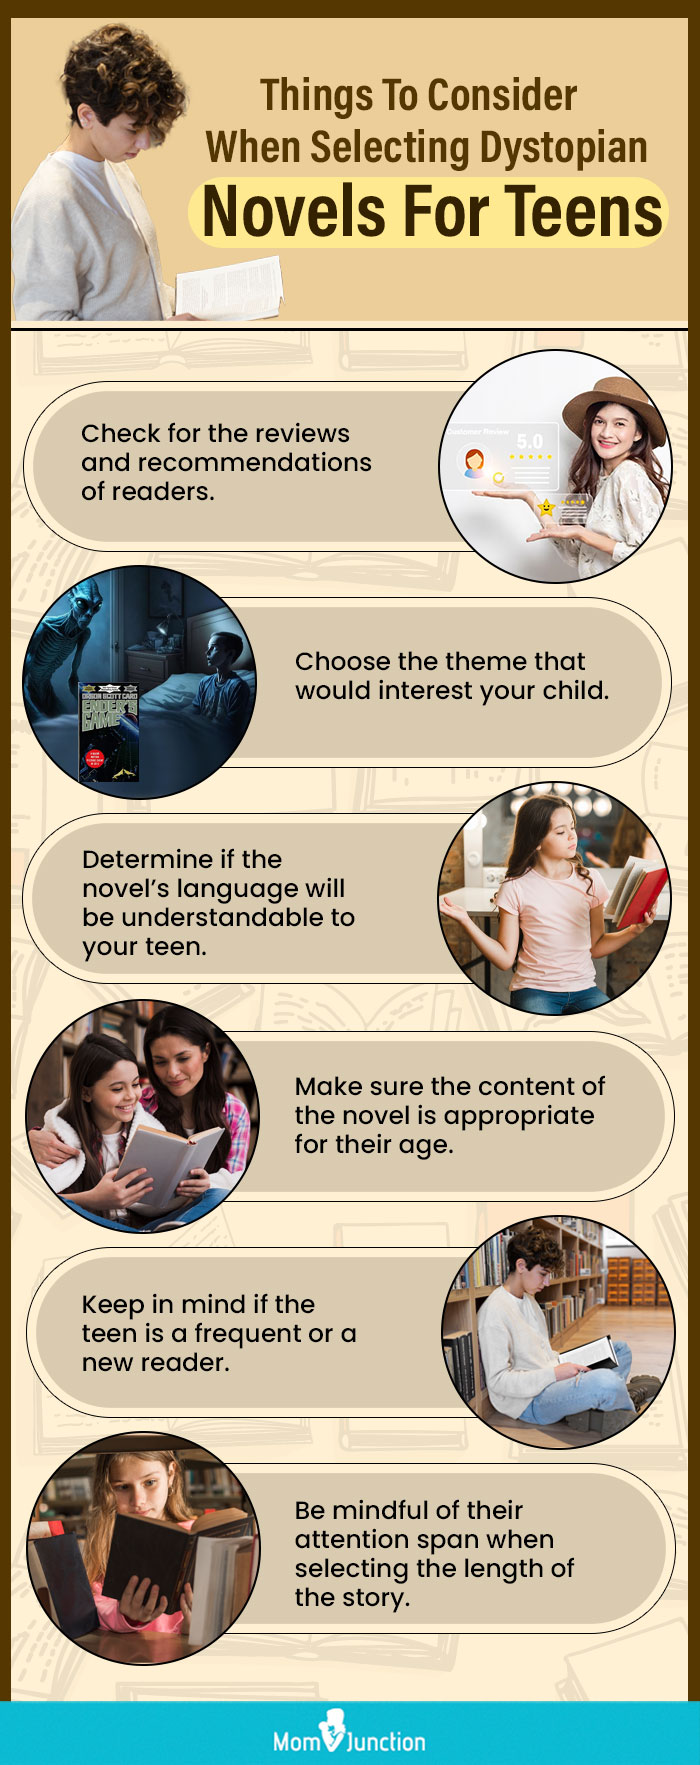 Things To Consider When Selecting Dystopian Novels For Teens (infographic)